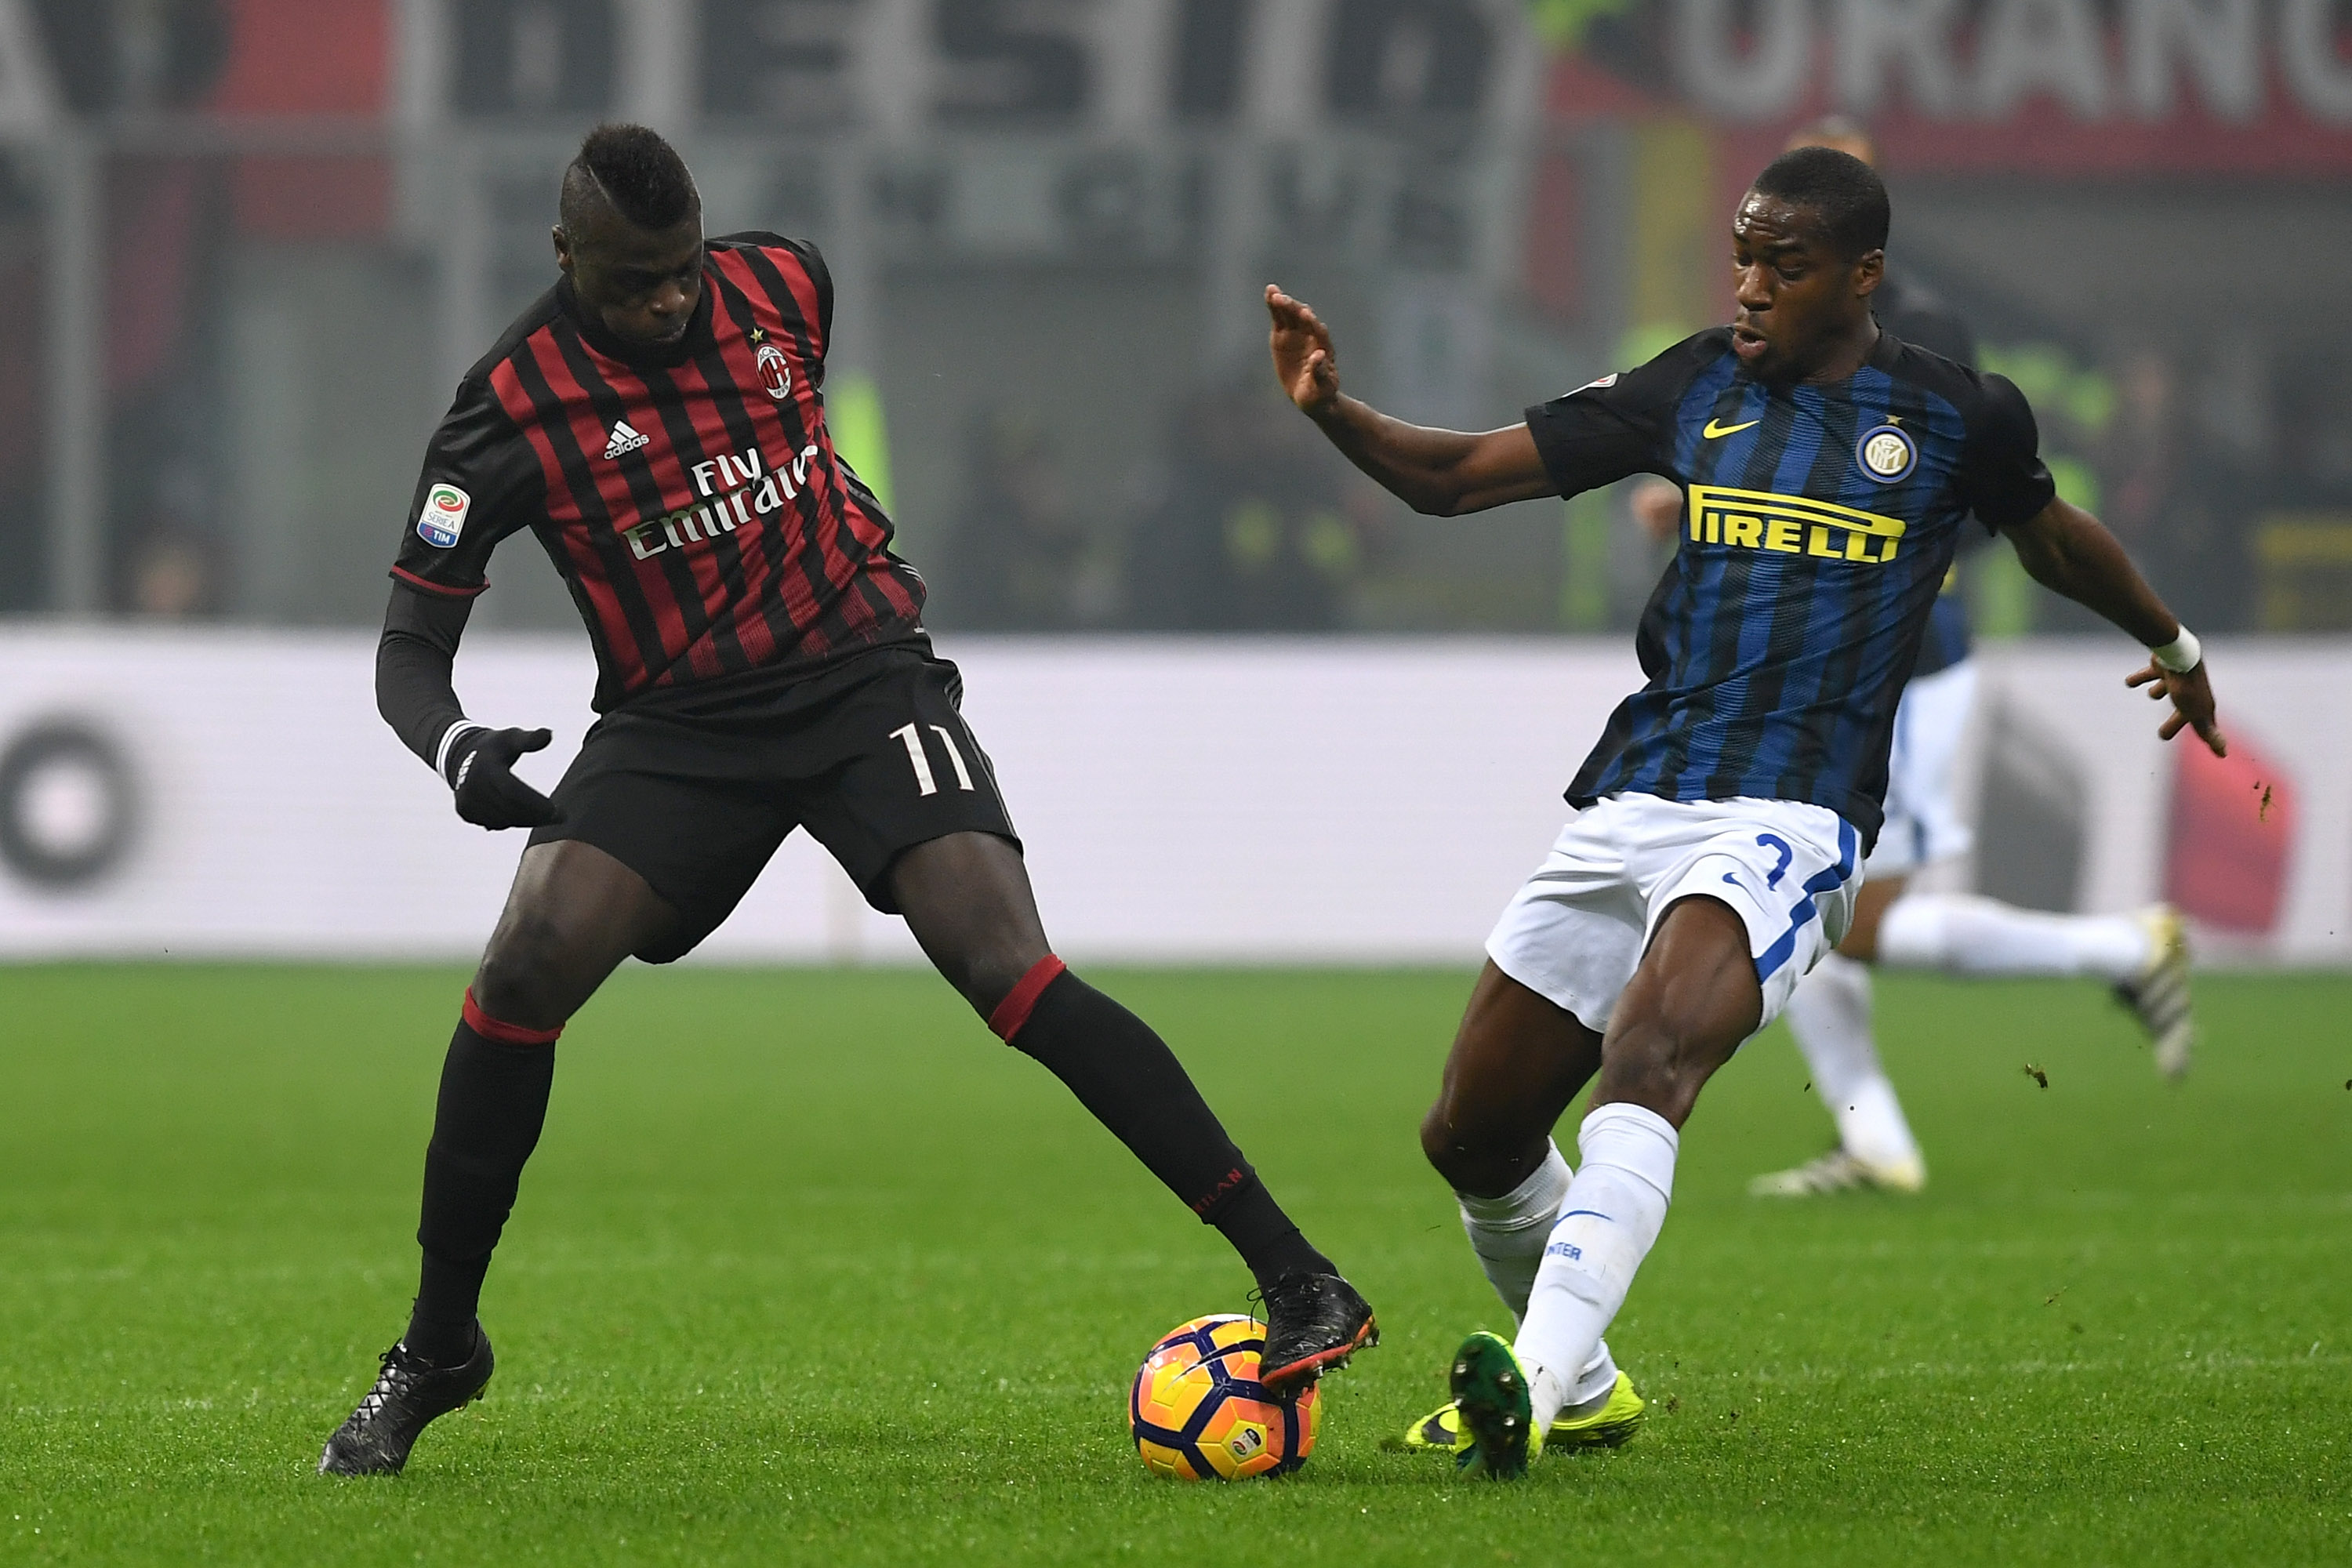 MILAN, ITALY - NOVEMBER 20:  Mbaye Niang (L) of AC Milan competes with Geoffrey Kondogbia of FC Internazionale during the Serie A match between AC Milan and FC Internazionale at Stadio Giuseppe Meazza on November 20, 2016 in Milan, Italy.  (Photo by Valerio Pennicino/Getty Images)